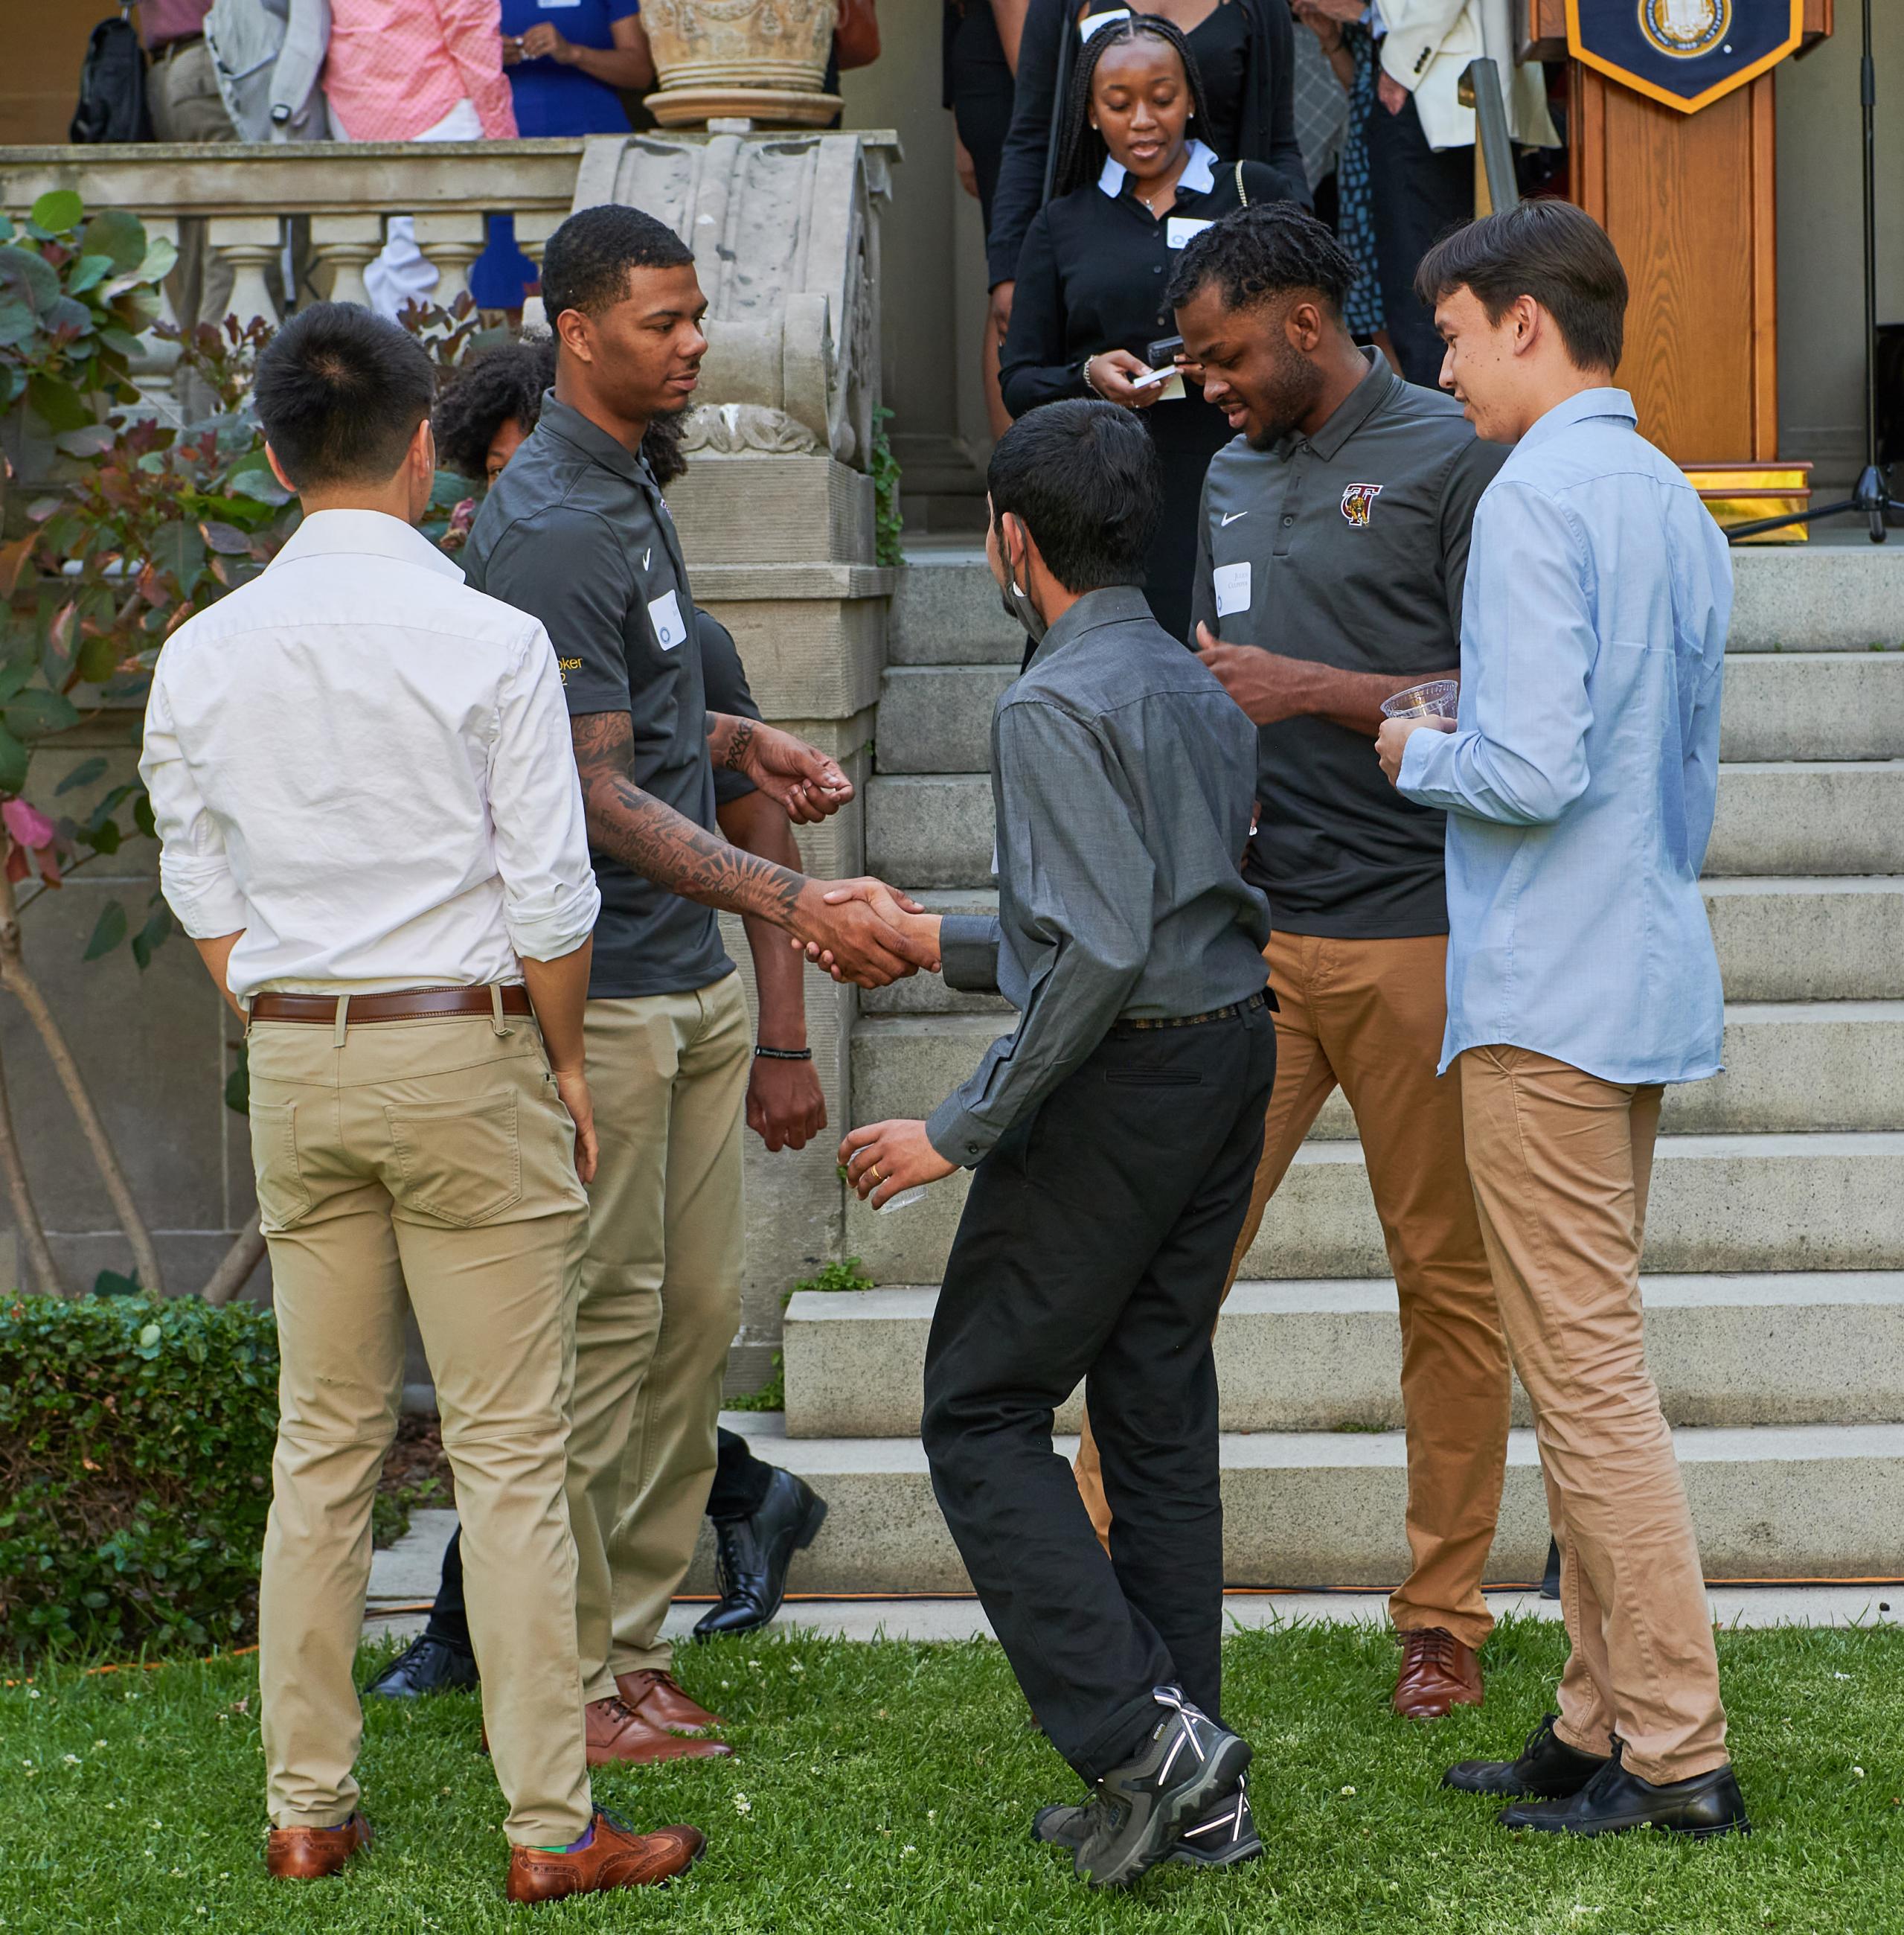 UC Berkeley Lecturer Kevin Miao (front left) and students Vivrd Prasanna (front center) and Oscar Bjorkman (front right) greet Tuskegee Scholars Devin Booker (back left) and Julius Culpepper IV (back right) at the Berkeley-Tuskegee Data Science Initiative Reception.